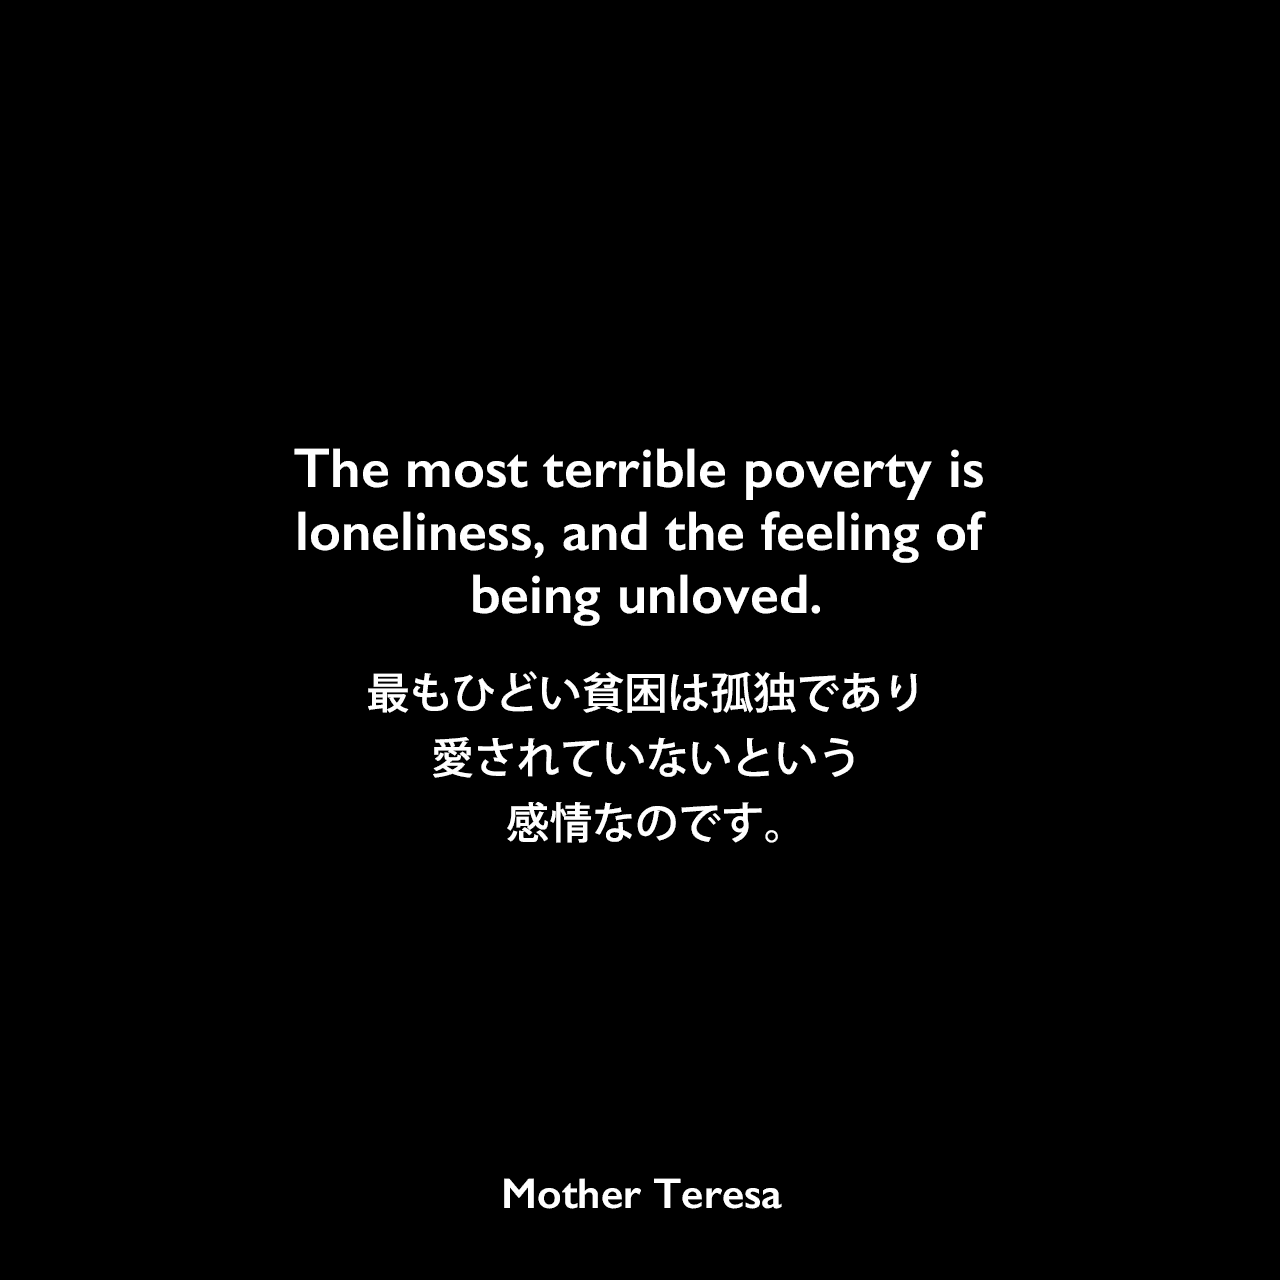 The most terrible poverty is loneliness, and the feeling of being unloved.最もひどい貧困は孤独であり、愛されていないという感情なのです。Mother Teresa